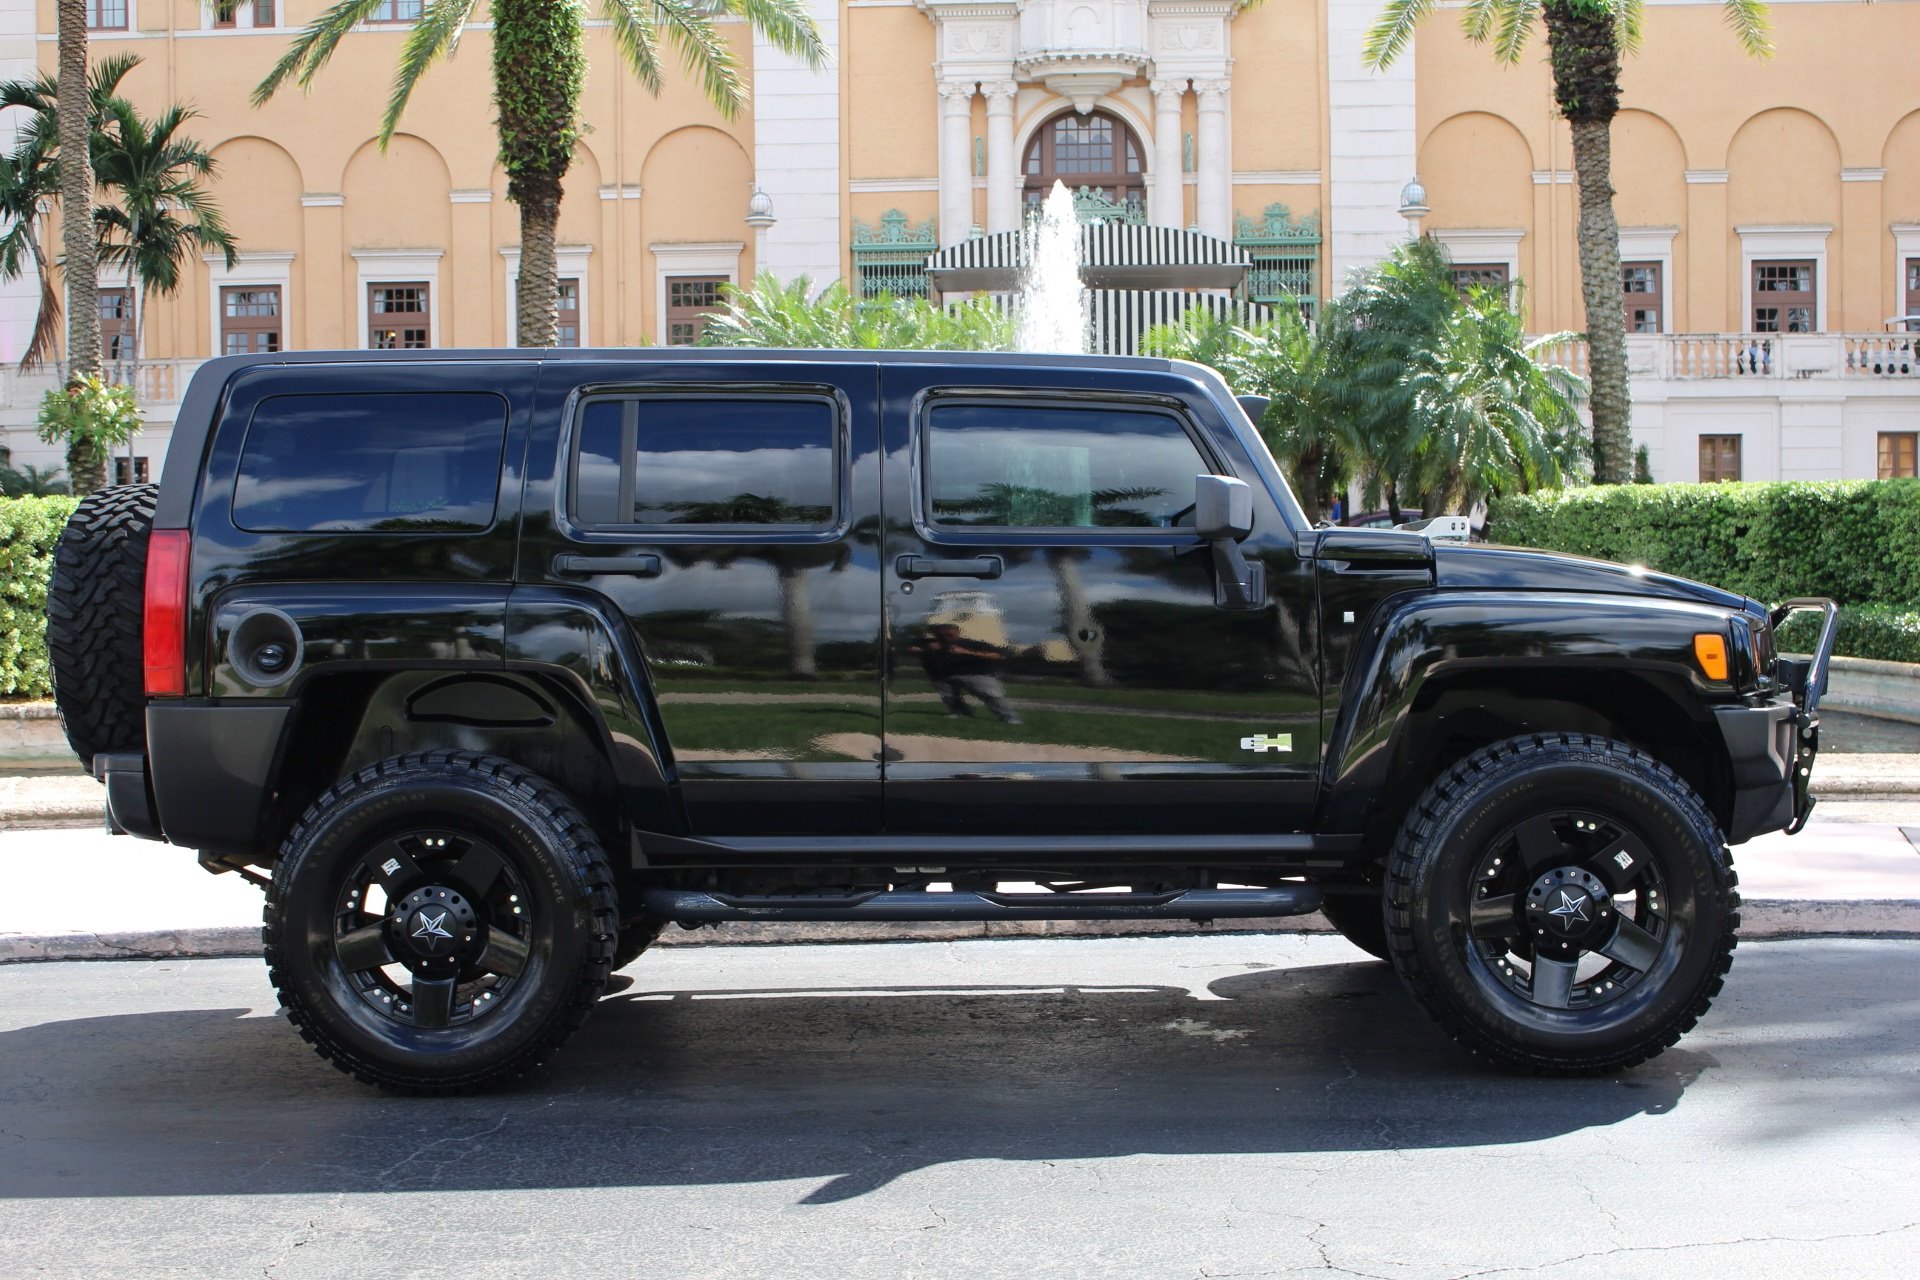 Used 2007 HUMMER H3 Adventure For Sale ($12,250) | The Gables Sports Cars  Stock #253318